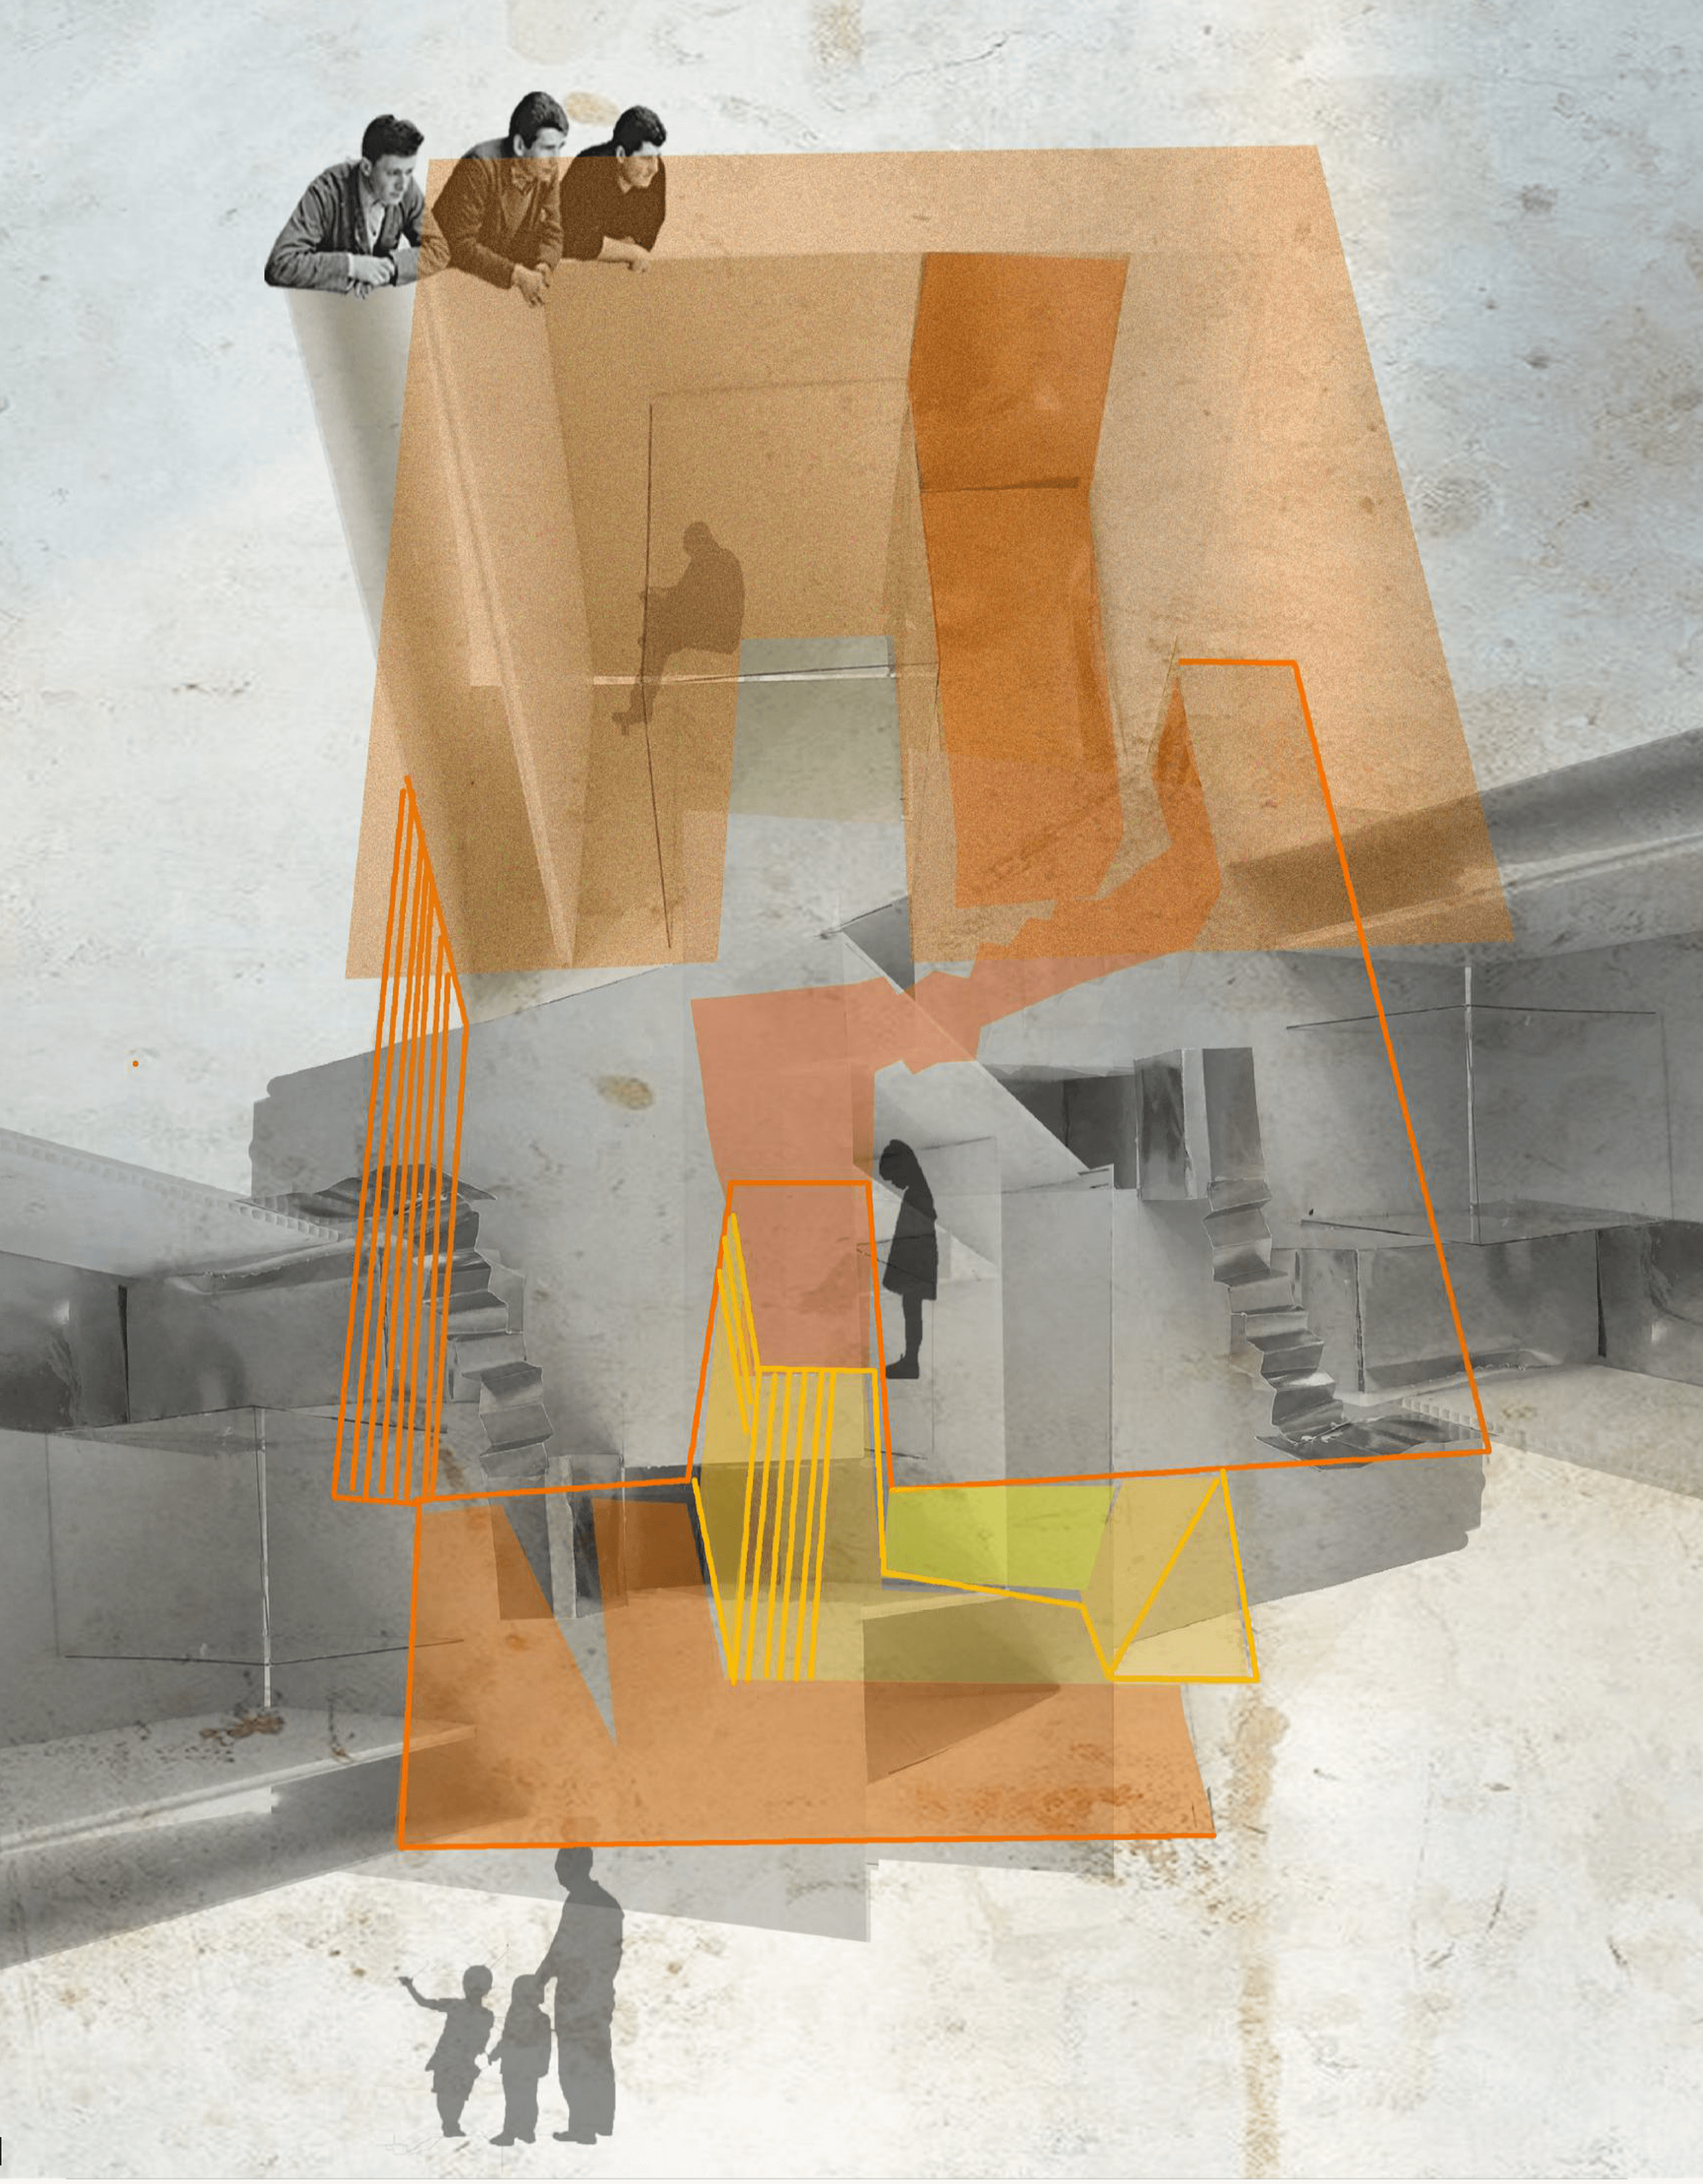 An interior design sketch showing a multi-level home with the silhouettes of various people throughout. The space is rendered in grey with orange and yellow wireframes overlaid on top.